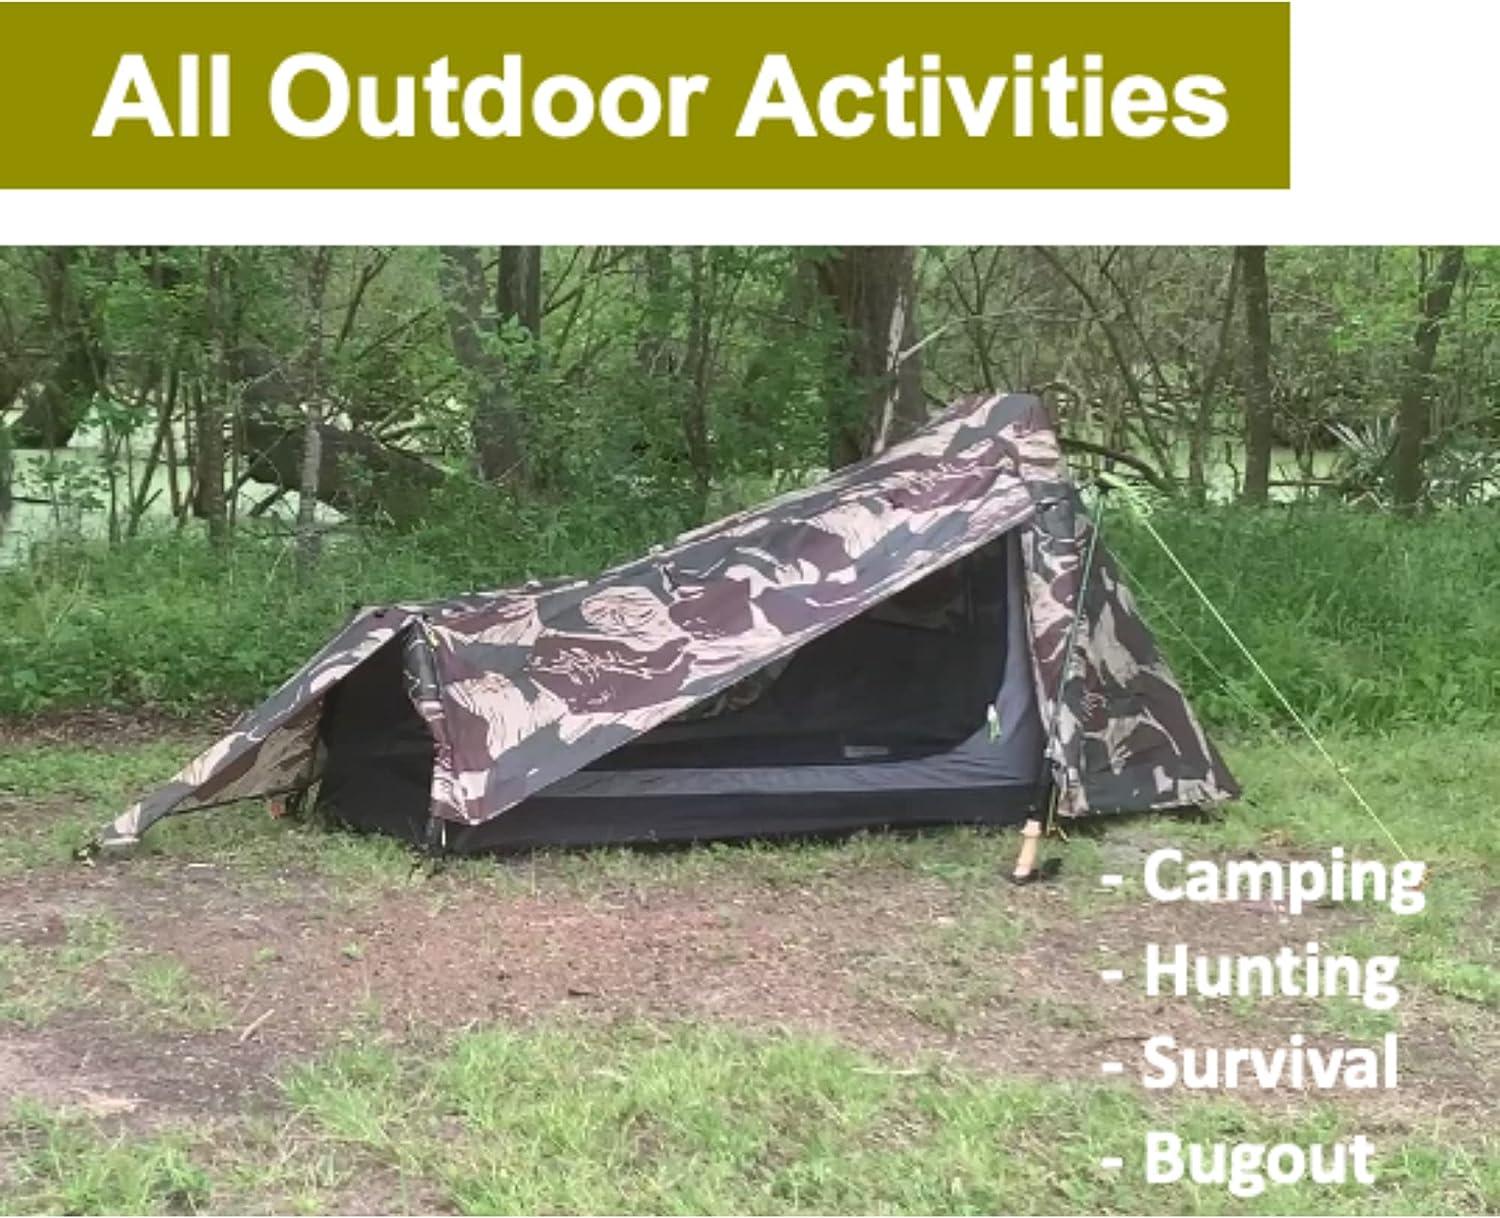 dragoon unlimited bivy tent camouflage survival shelter setup